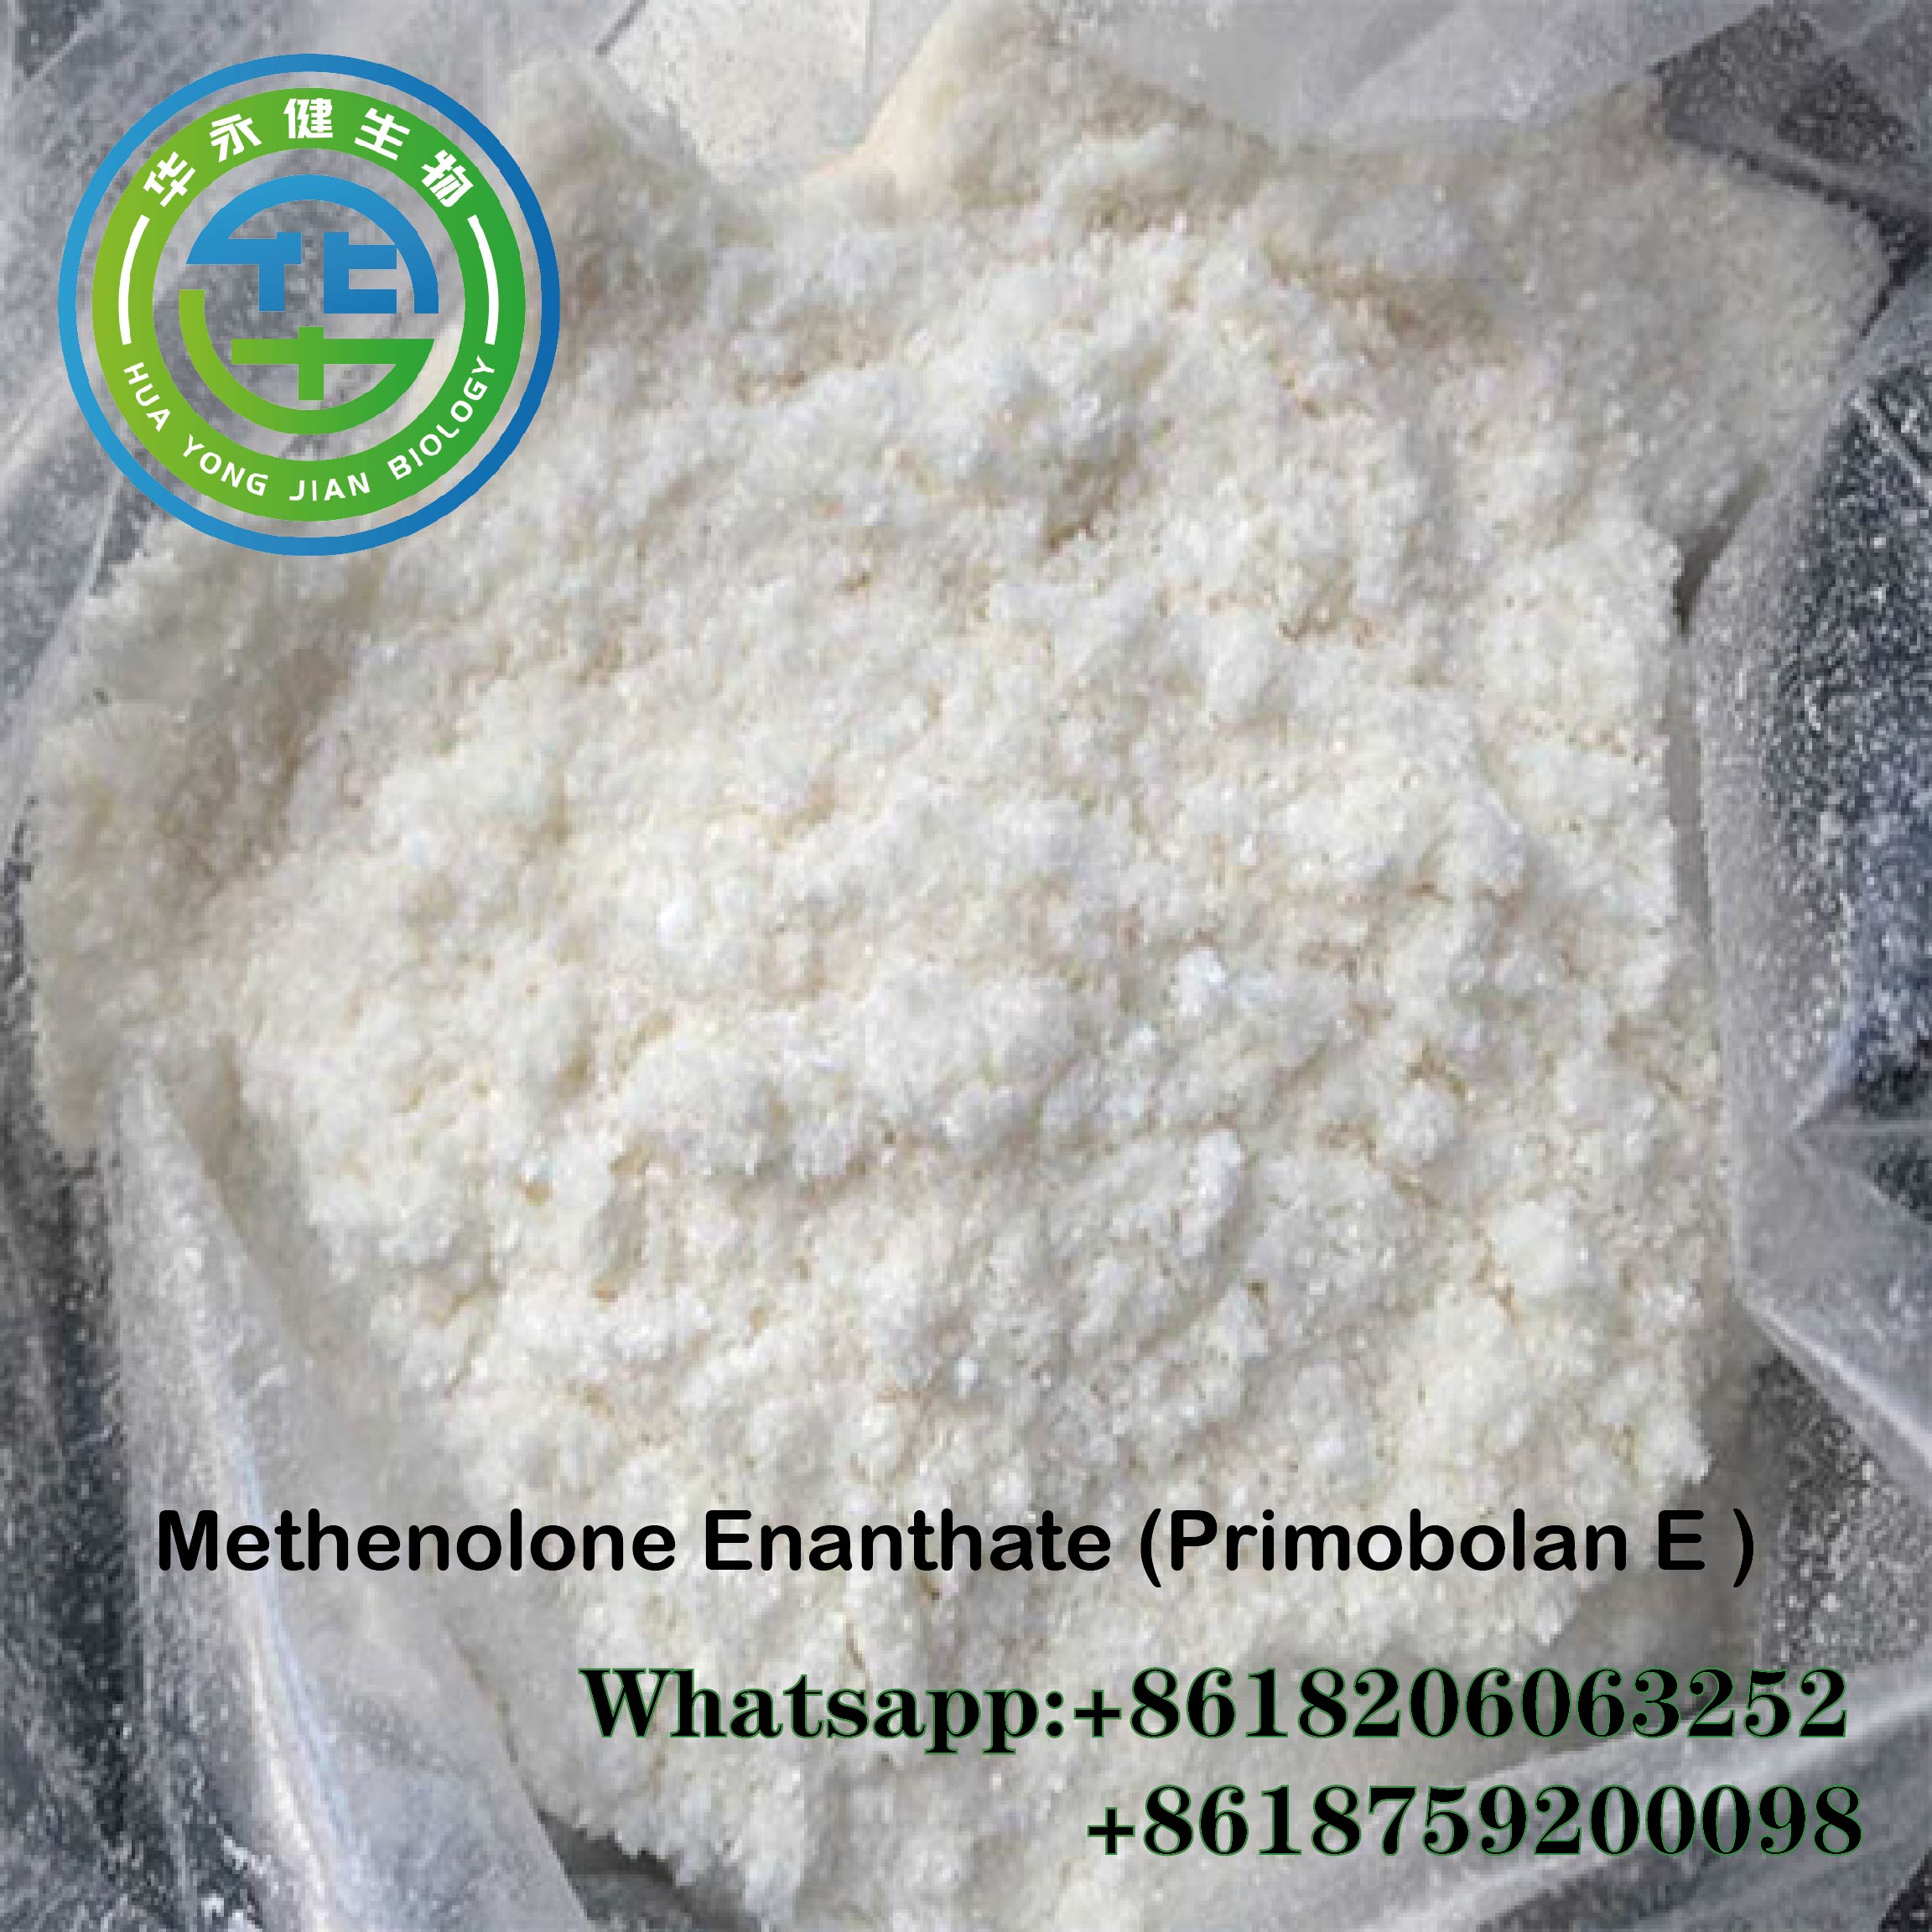 99% Anabolic Steroid Raw Powder Methenolone Enanthate / Primobolan with Safe Delivery